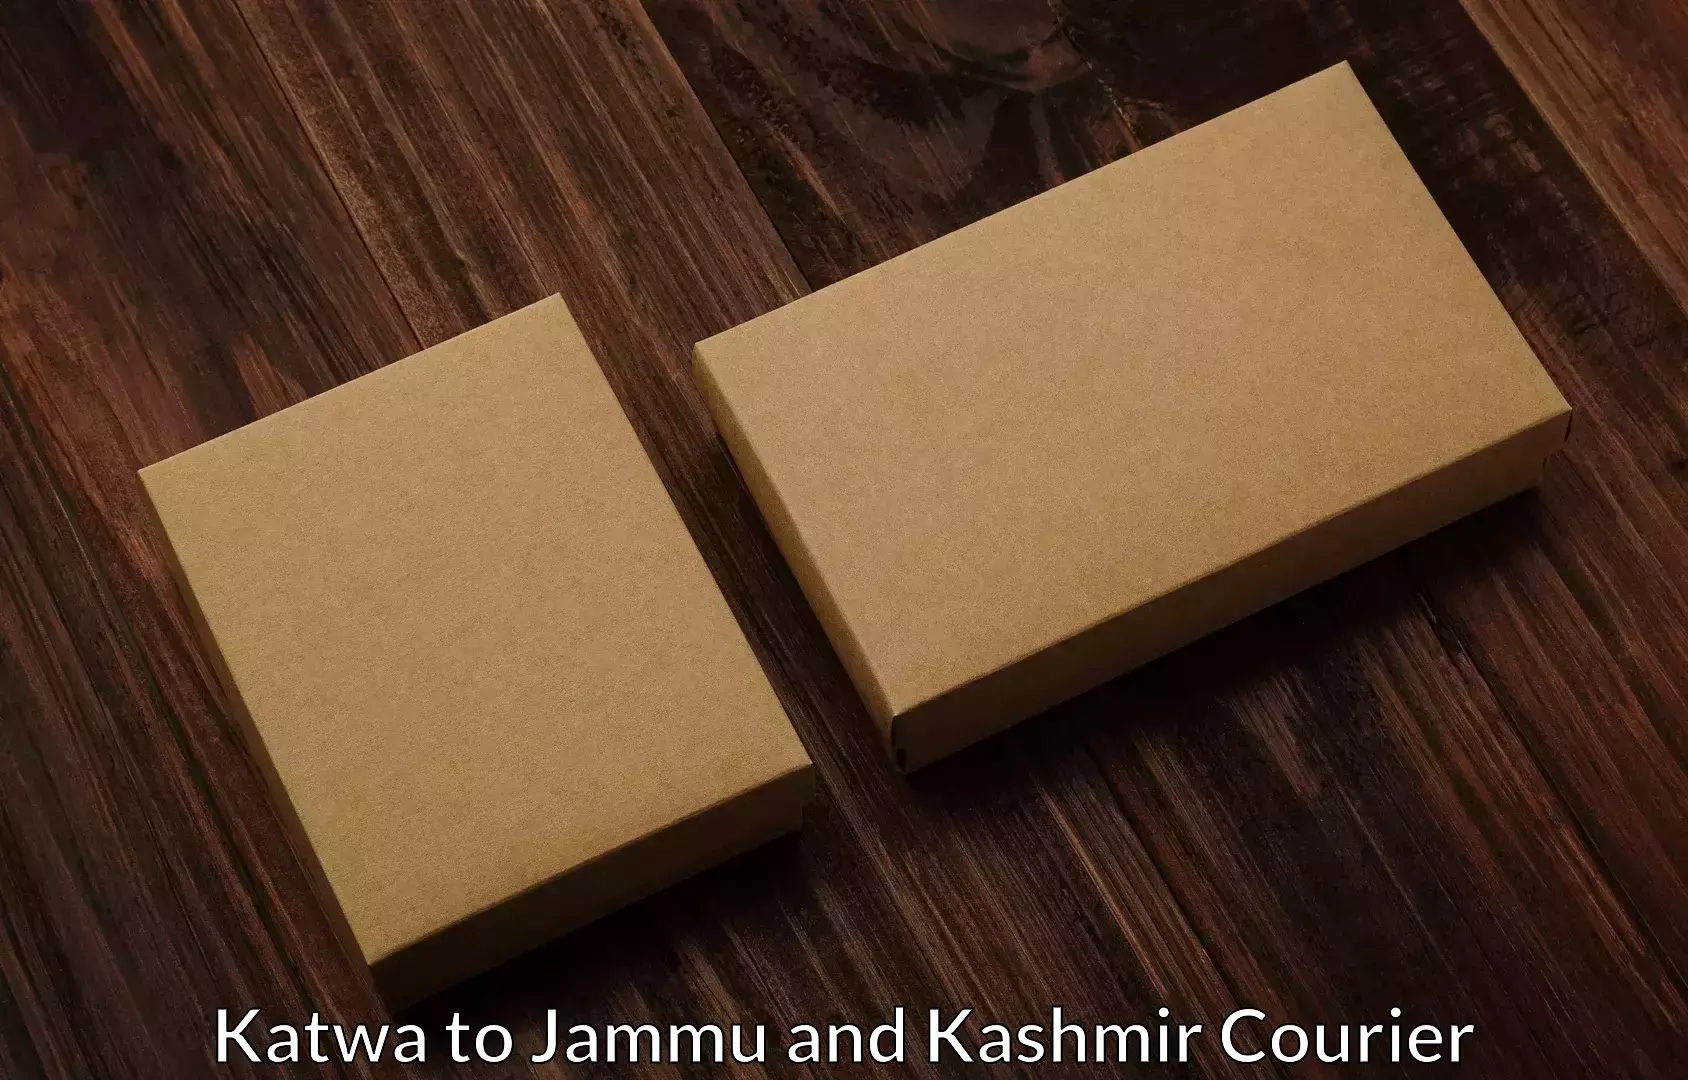 Efficient relocation services Katwa to Jammu and Kashmir